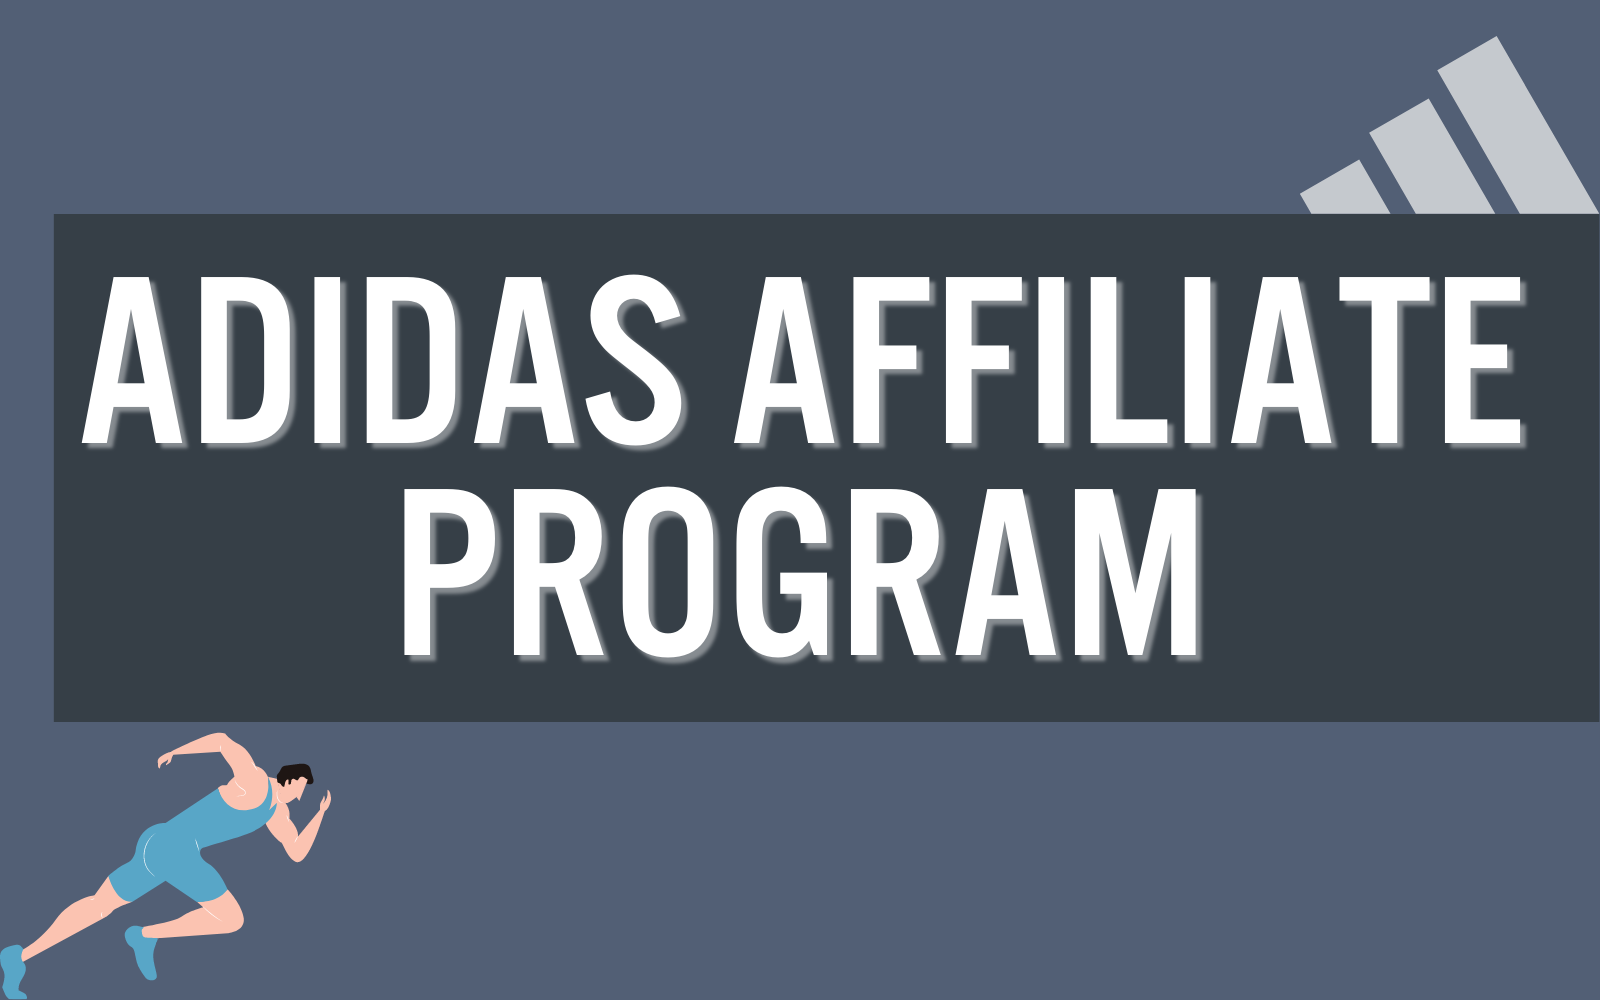  Adidas Affiliate Program work, affiliate marketing program, affiliate link, promote adidas, join the adidas affiliate program free, adidas products, promote adidas products, adidas affiliate program commission, adidas affiliate program worth, adidas sports accessories, adidas affiliate program commissions, adidas brand, sports bras, adidas affiliates, affiliate marketers, custom apparel collection, engaged audience, adidas website, all the sports lovers, marketing materials, promoting adidas products, sports shoes, pay affiliates directly, athletic lifestyle, creative assets, shoe company, iconic brand ,gym bags ,athletic clubs ,direct bank transfer ,innovative footwear ,basketball shoes ,coupon sites ,running shoes ,track pants become an adidas affiliate ,football jerseys ,social media posts ,clothing items measurable performance social media page t shirts sports lovers women's clothing affiliate marketing.